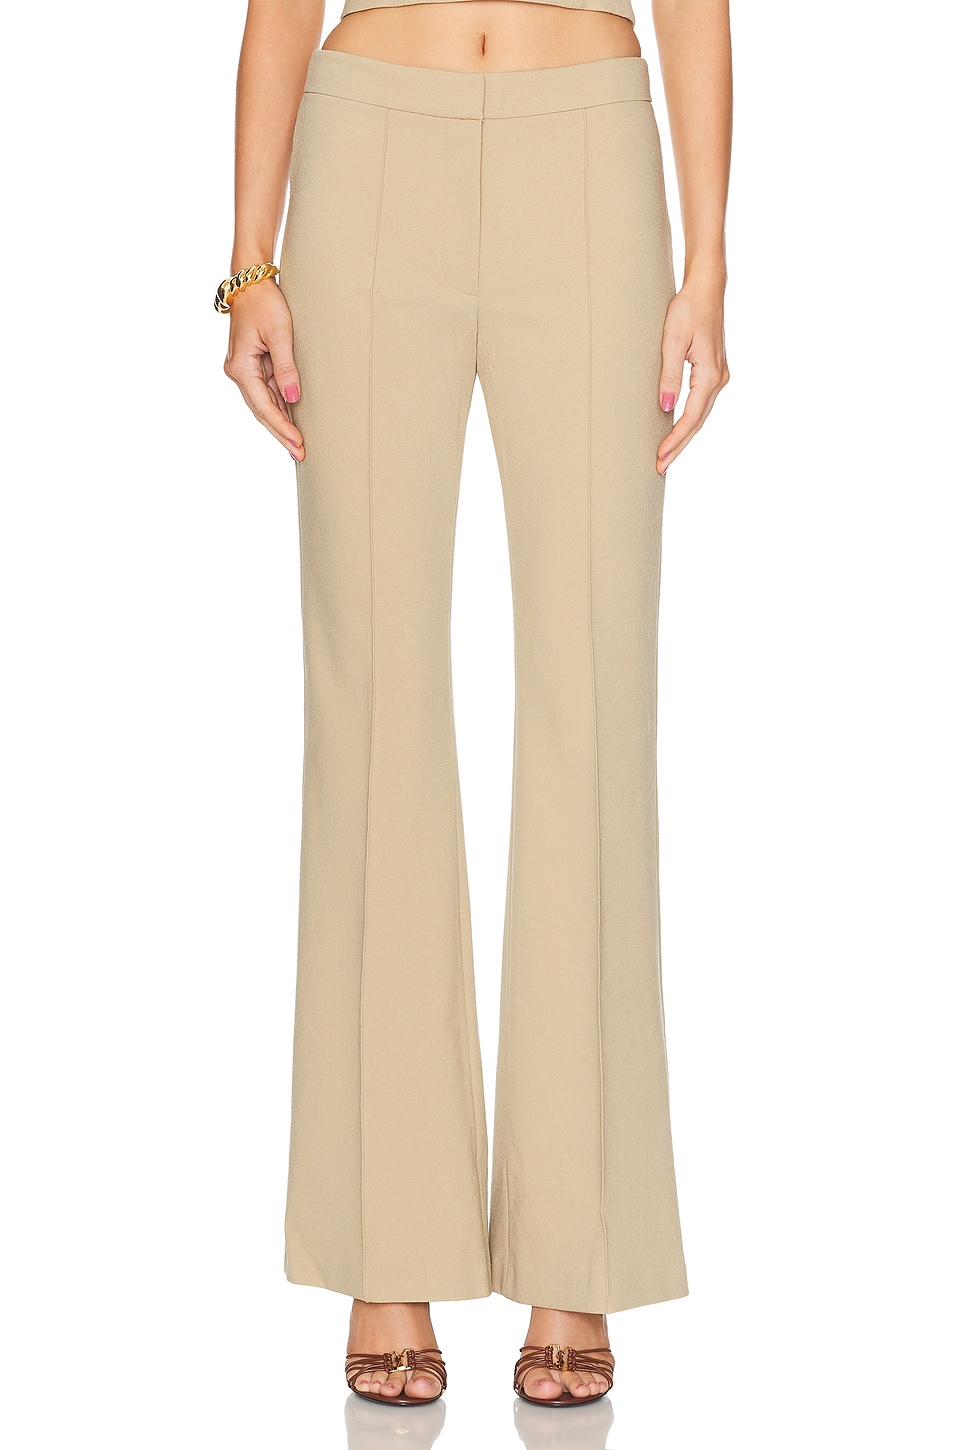 Lizzy Low Rise Flared Trouser in Brown